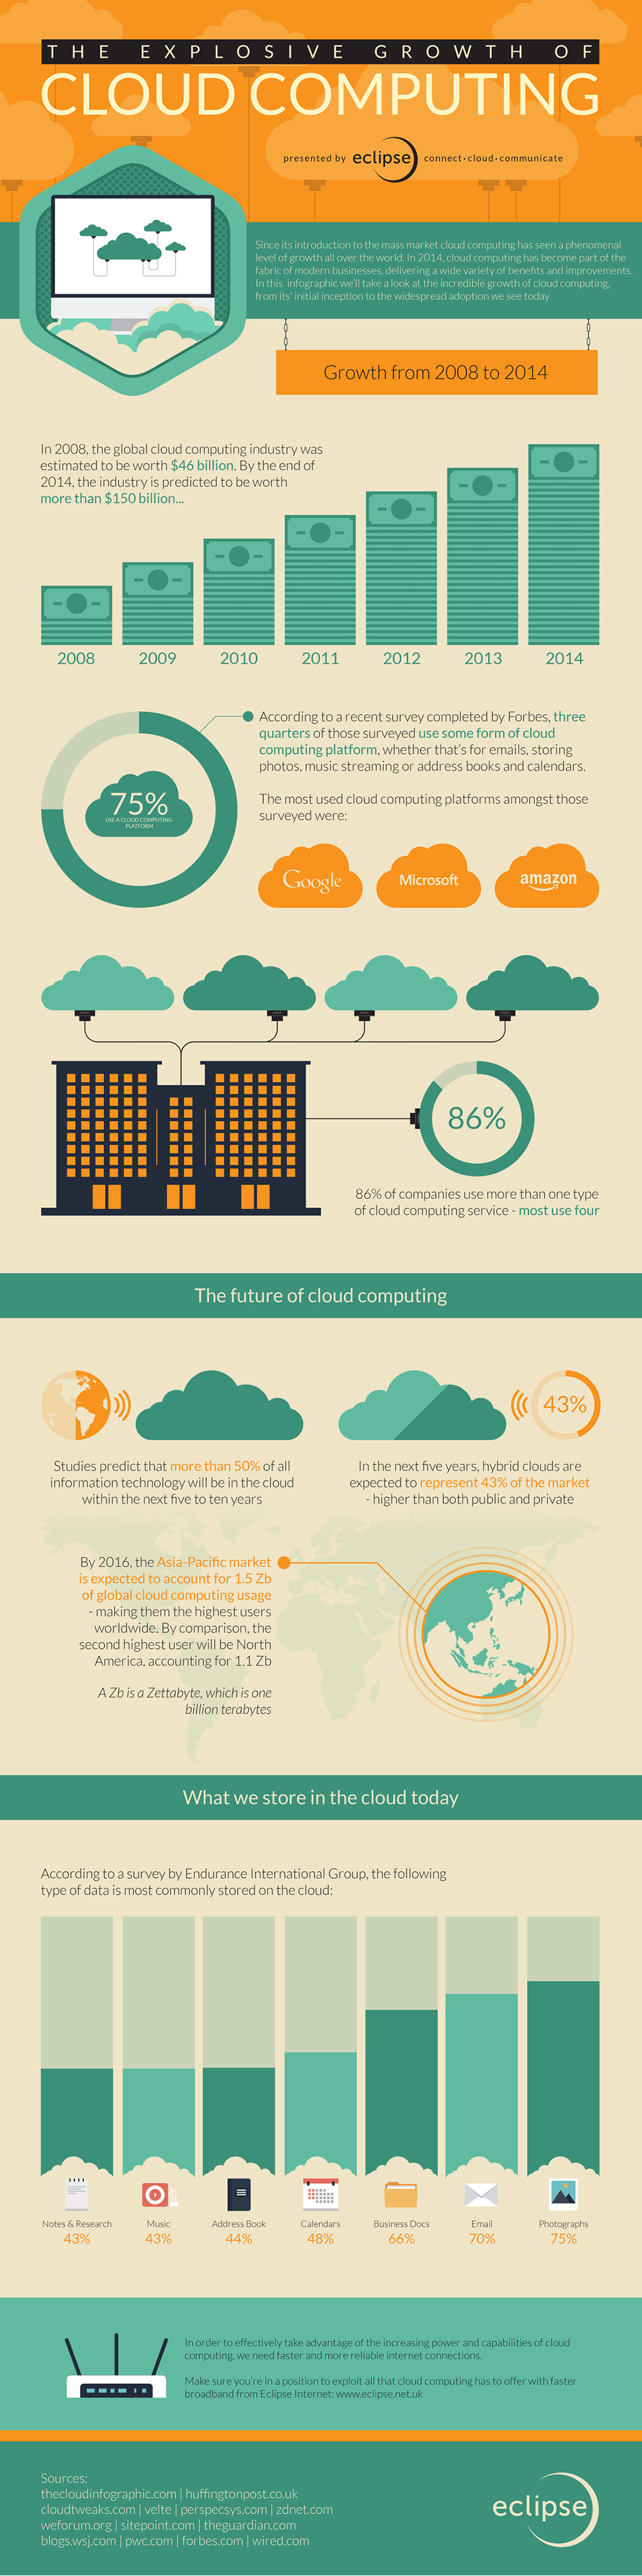 Cloud Computing in 2014 Infographic